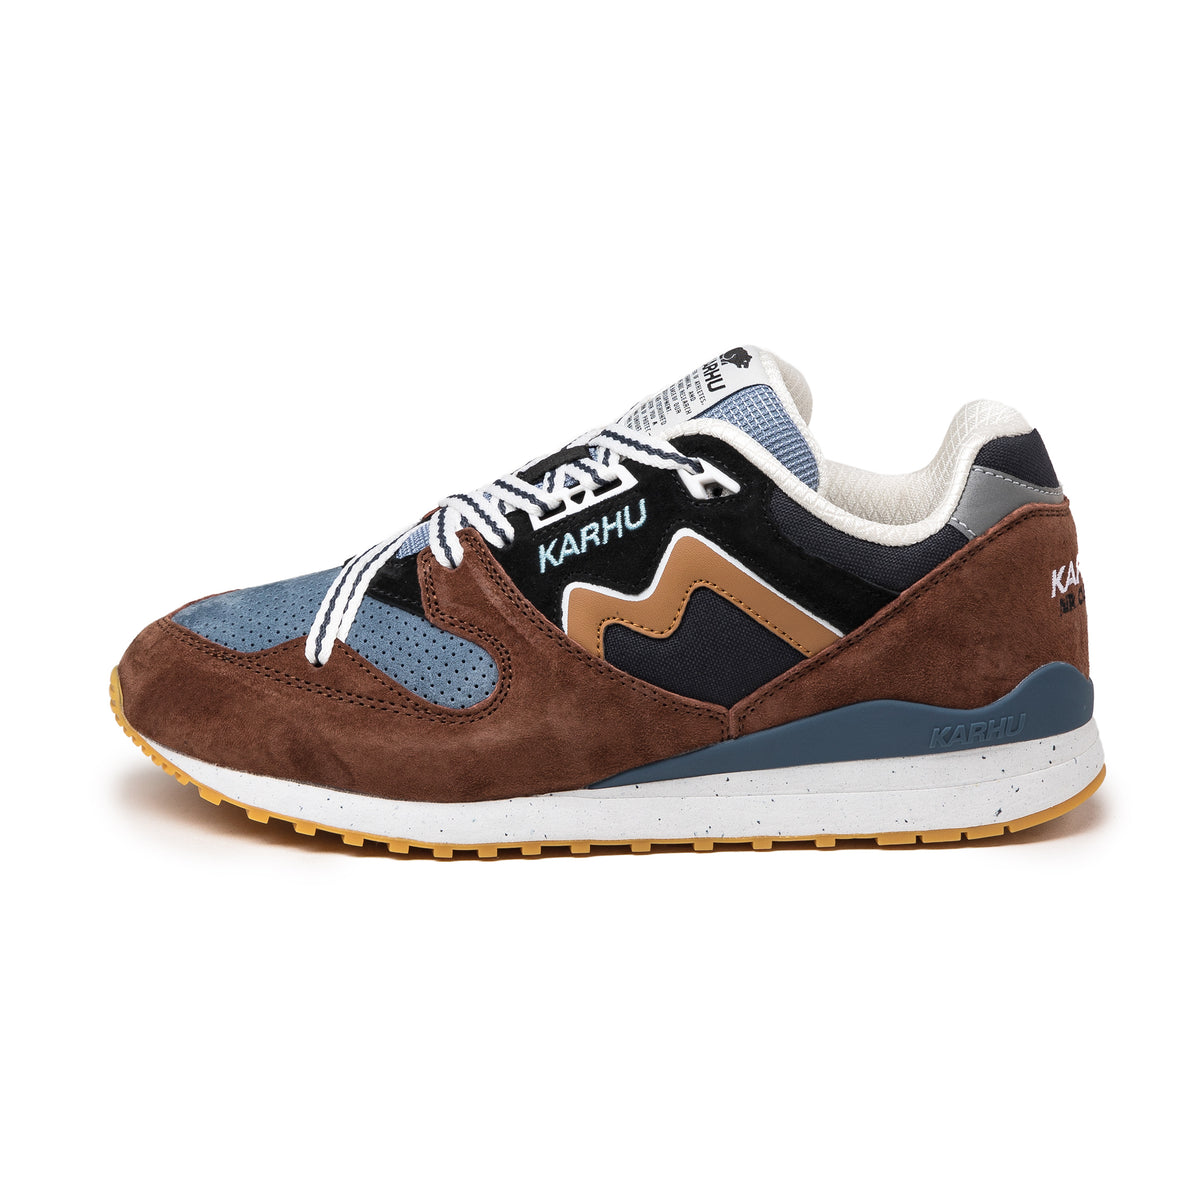 Karhu Synchron Classic *Trees of Finland* – buy now online at ASPHALTGOLD!